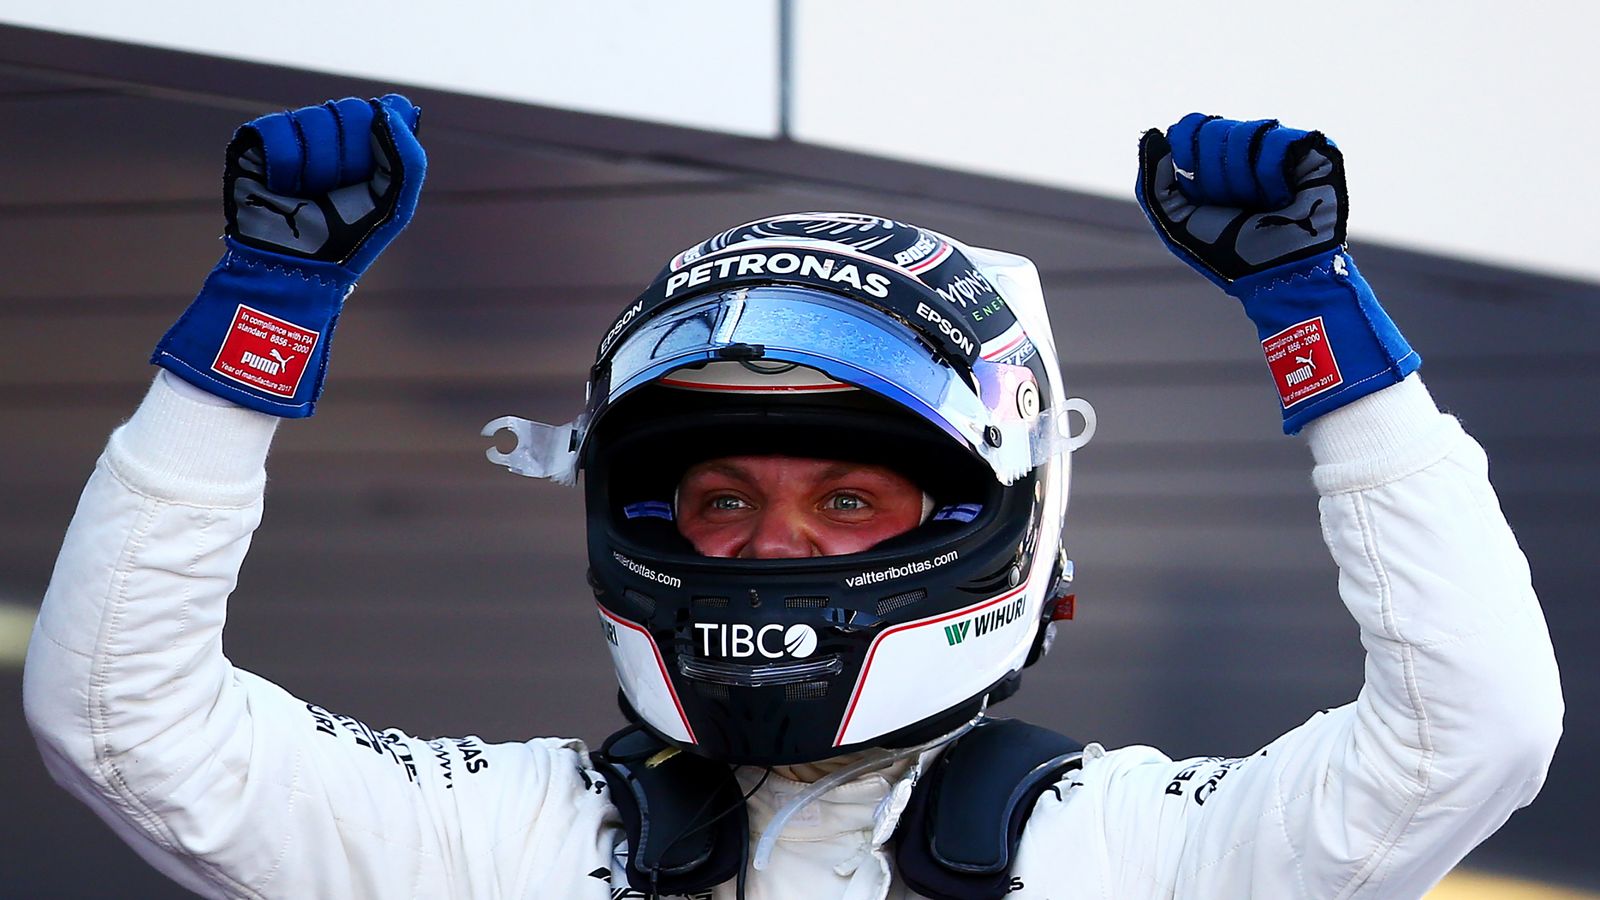 F1 Report Is Valtteri Bottas now a 2017 title contender? F1 News